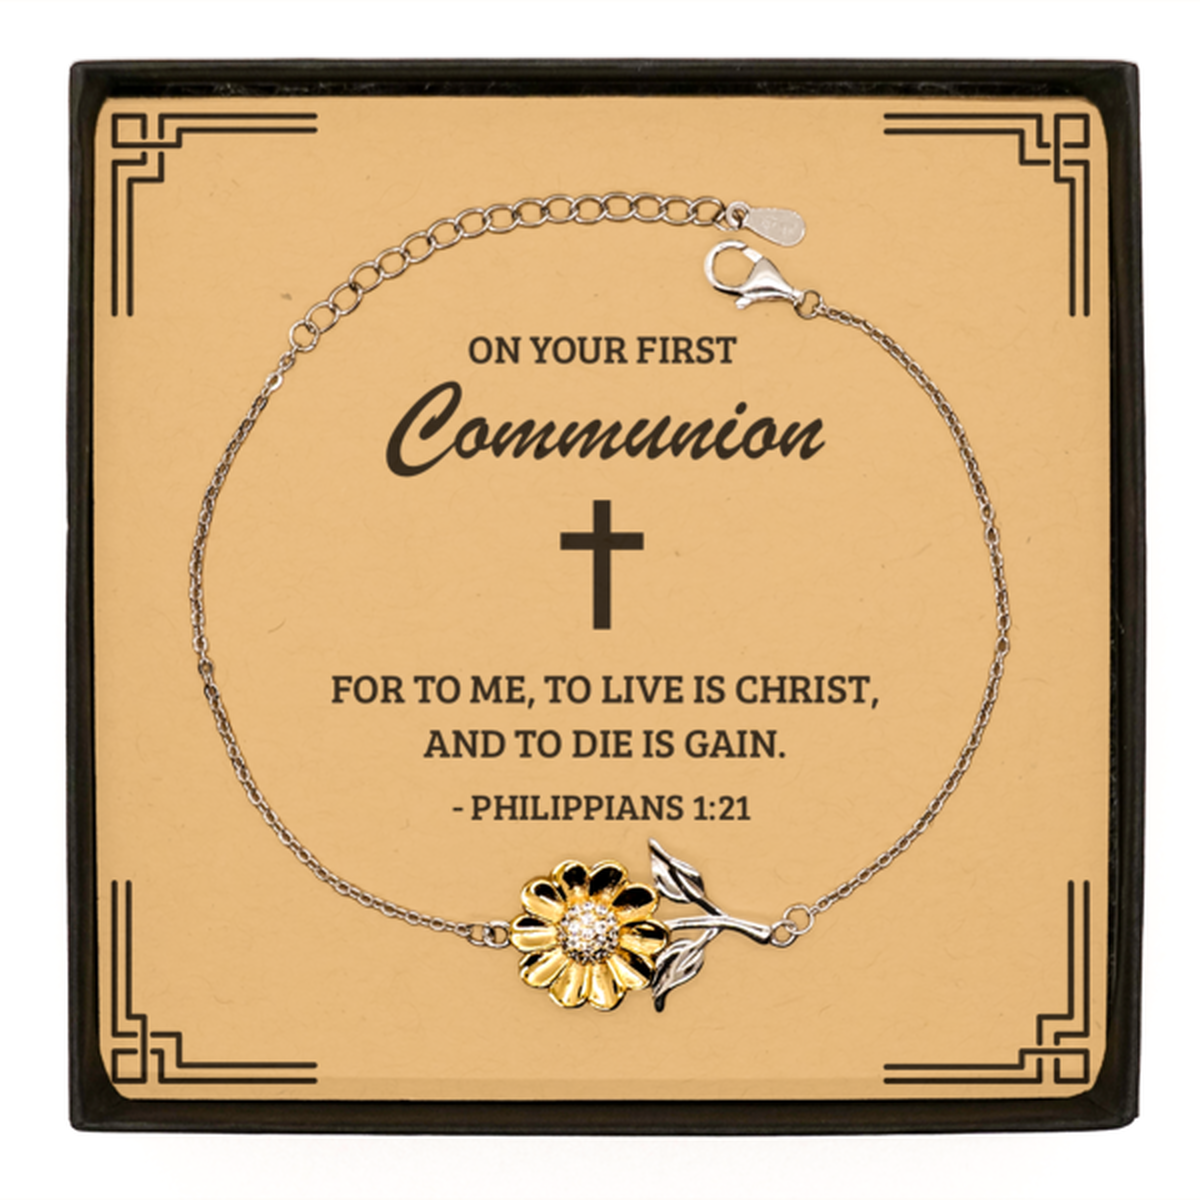 First Communion Gifts for Teenage Girls, To live is Christ, and to die is gain, .925 Sterling Silver Sunflower Bracelet with Bible Verse Message Card, Religious Catholic Bracelet for Daughter, Granddaughter